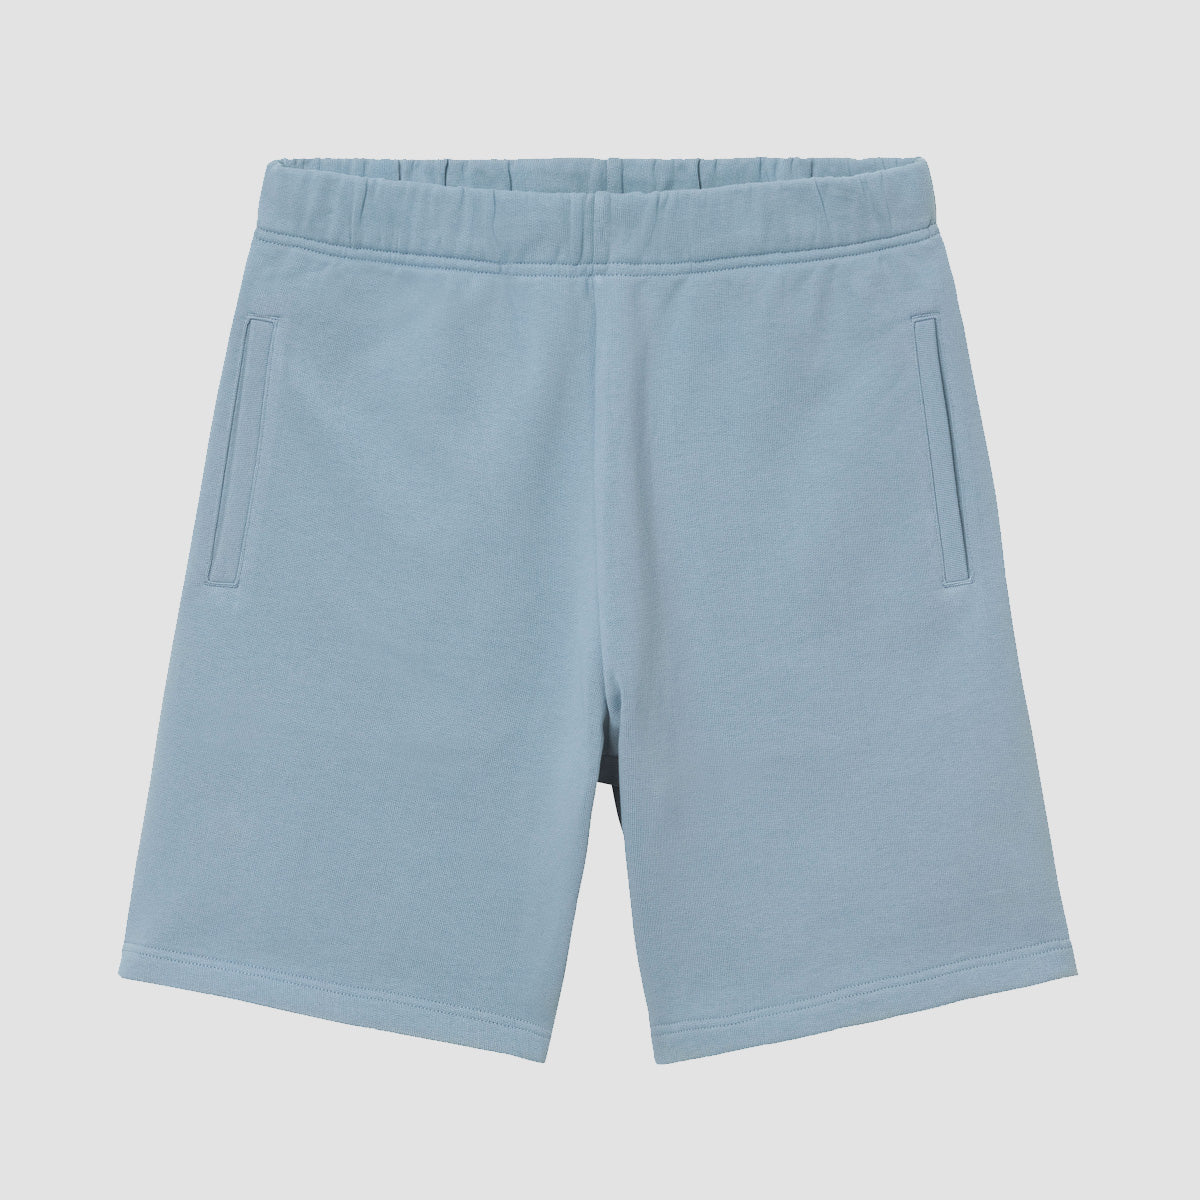 Carhartt WIP Pocket Sweat Shorts Frosted Blue